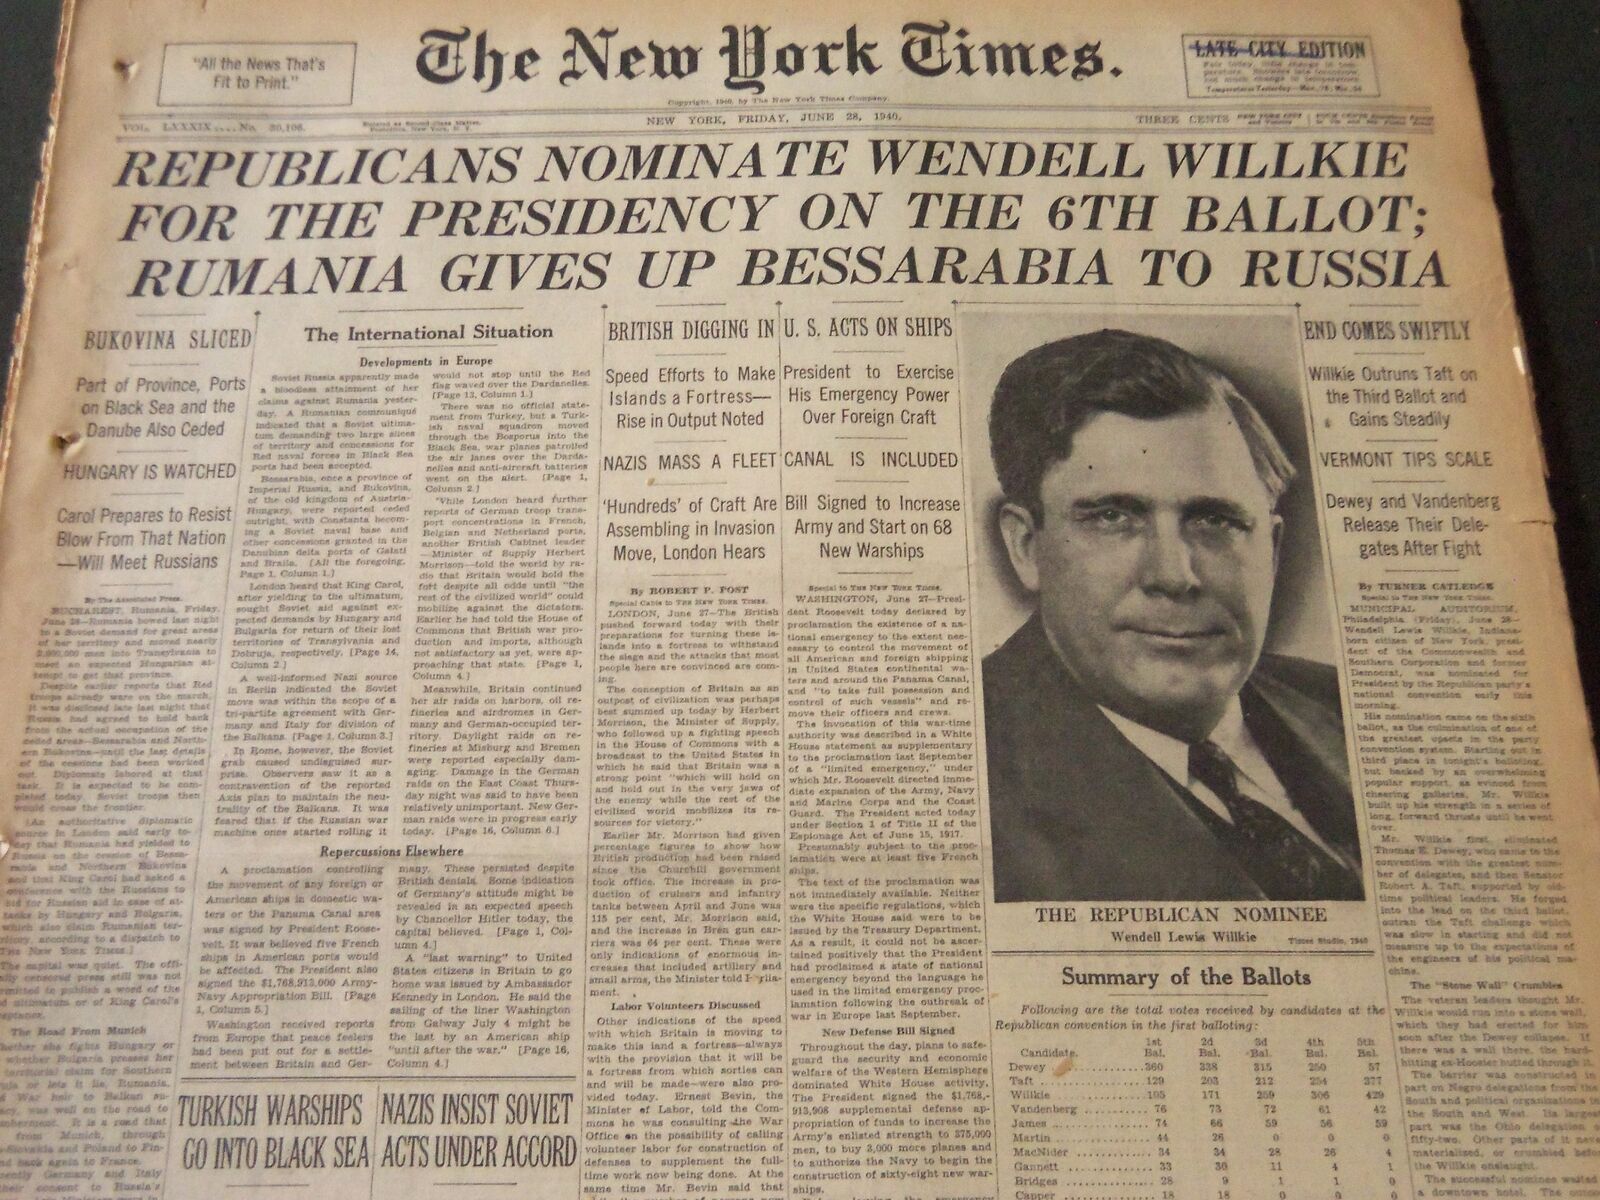 1940 JUNE 28 NEW YORK TIMES - REPUBLICANS NOMINATE WENDELL WILKIE - NT 5536